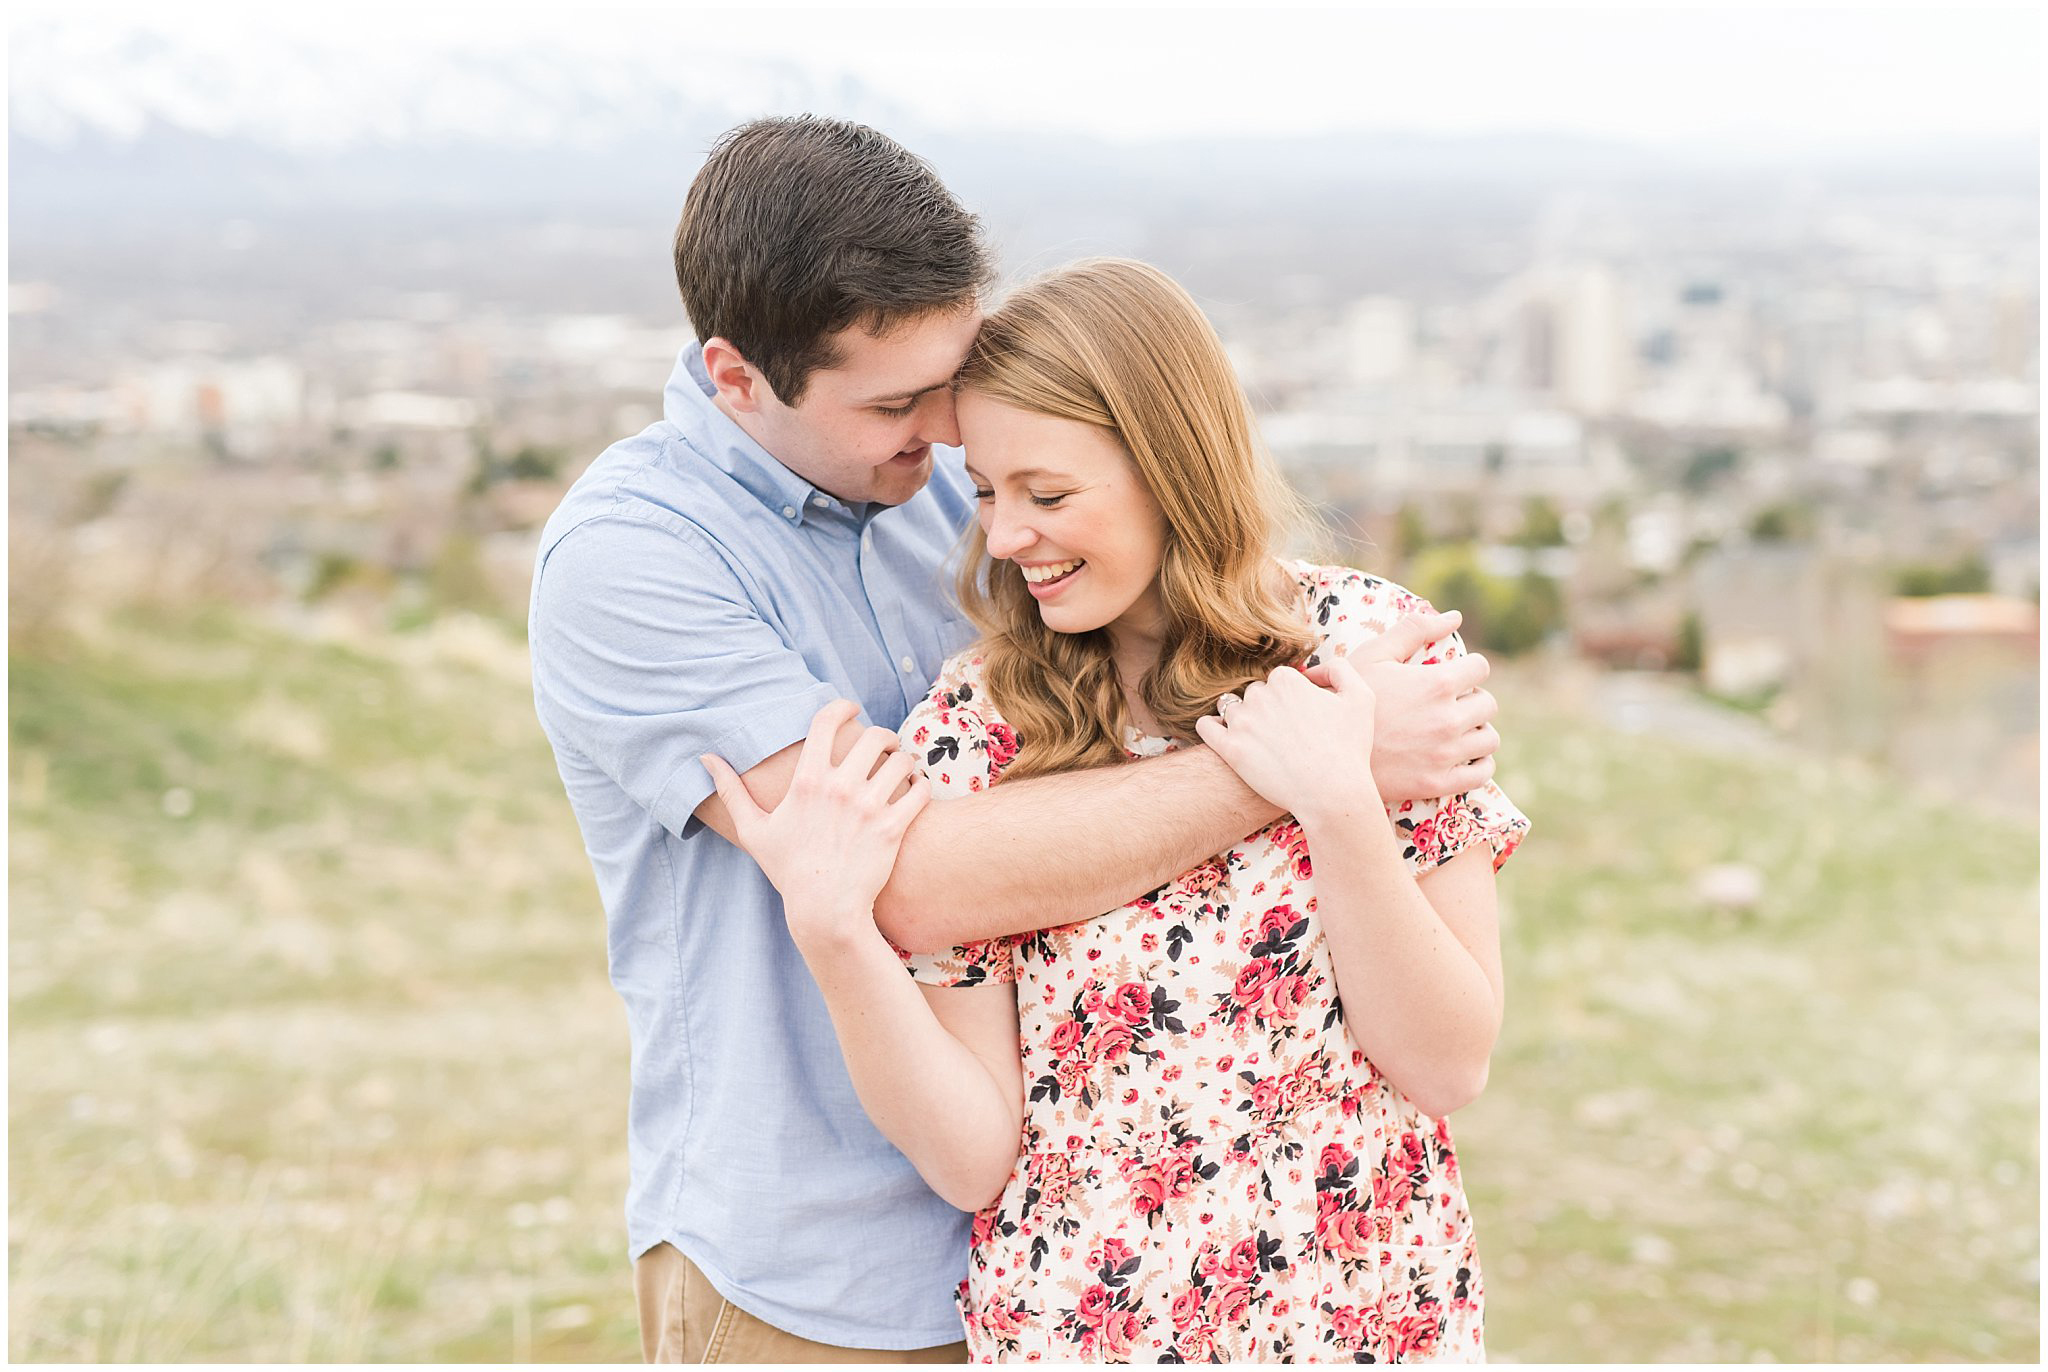 Couple on mountain overlooking city | Downtown Salt Lake and Ensign Peak Engagement | Utah Wedding Photographers | Jessie and Dallin Photography